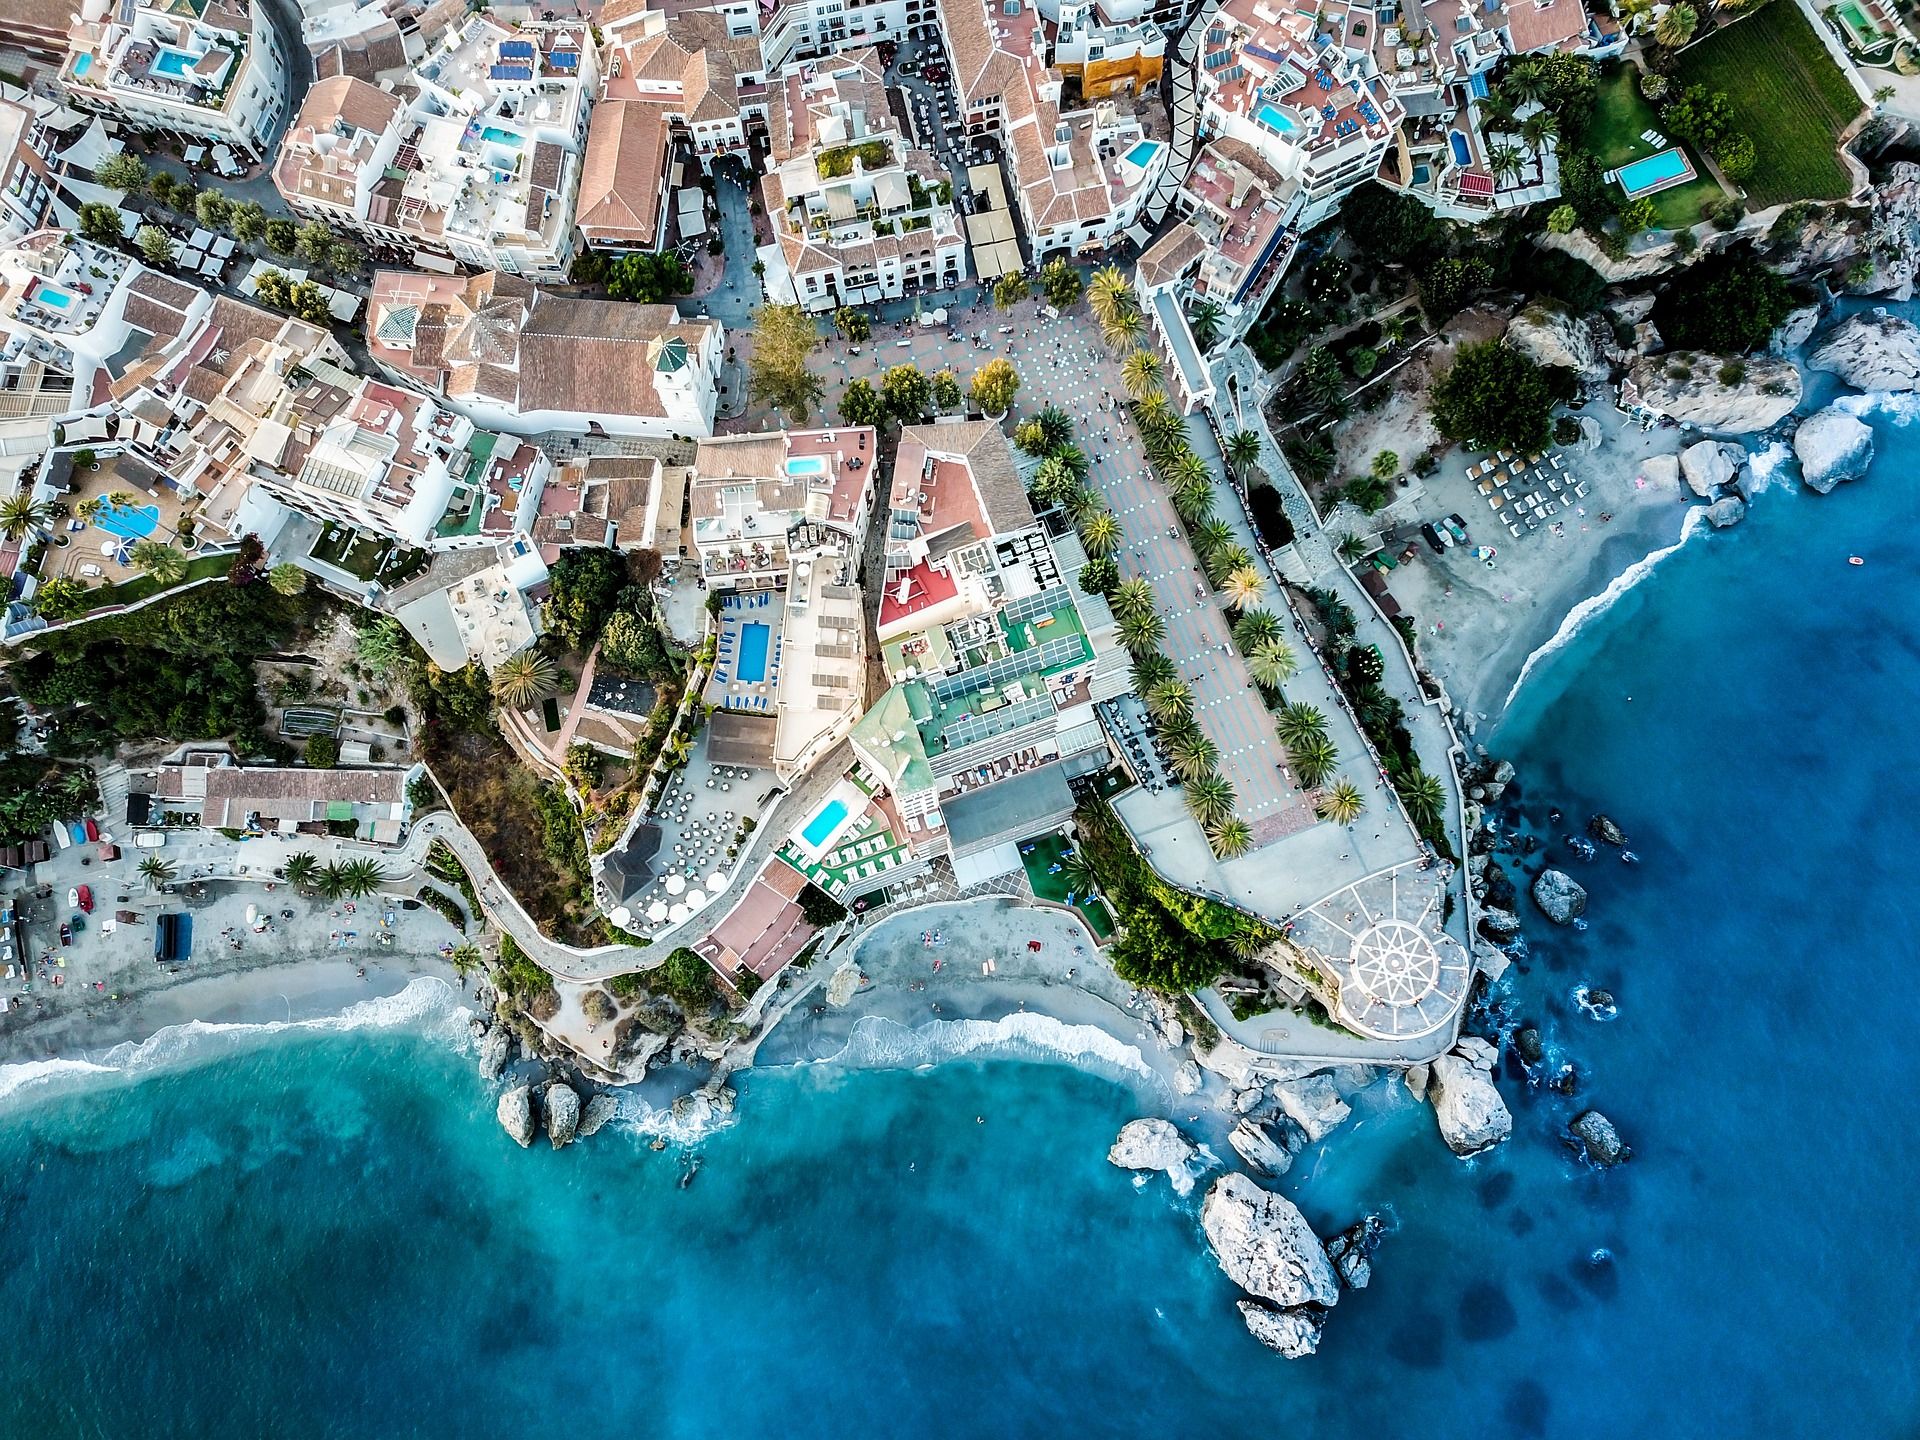 Pictures of Nerja, Spain